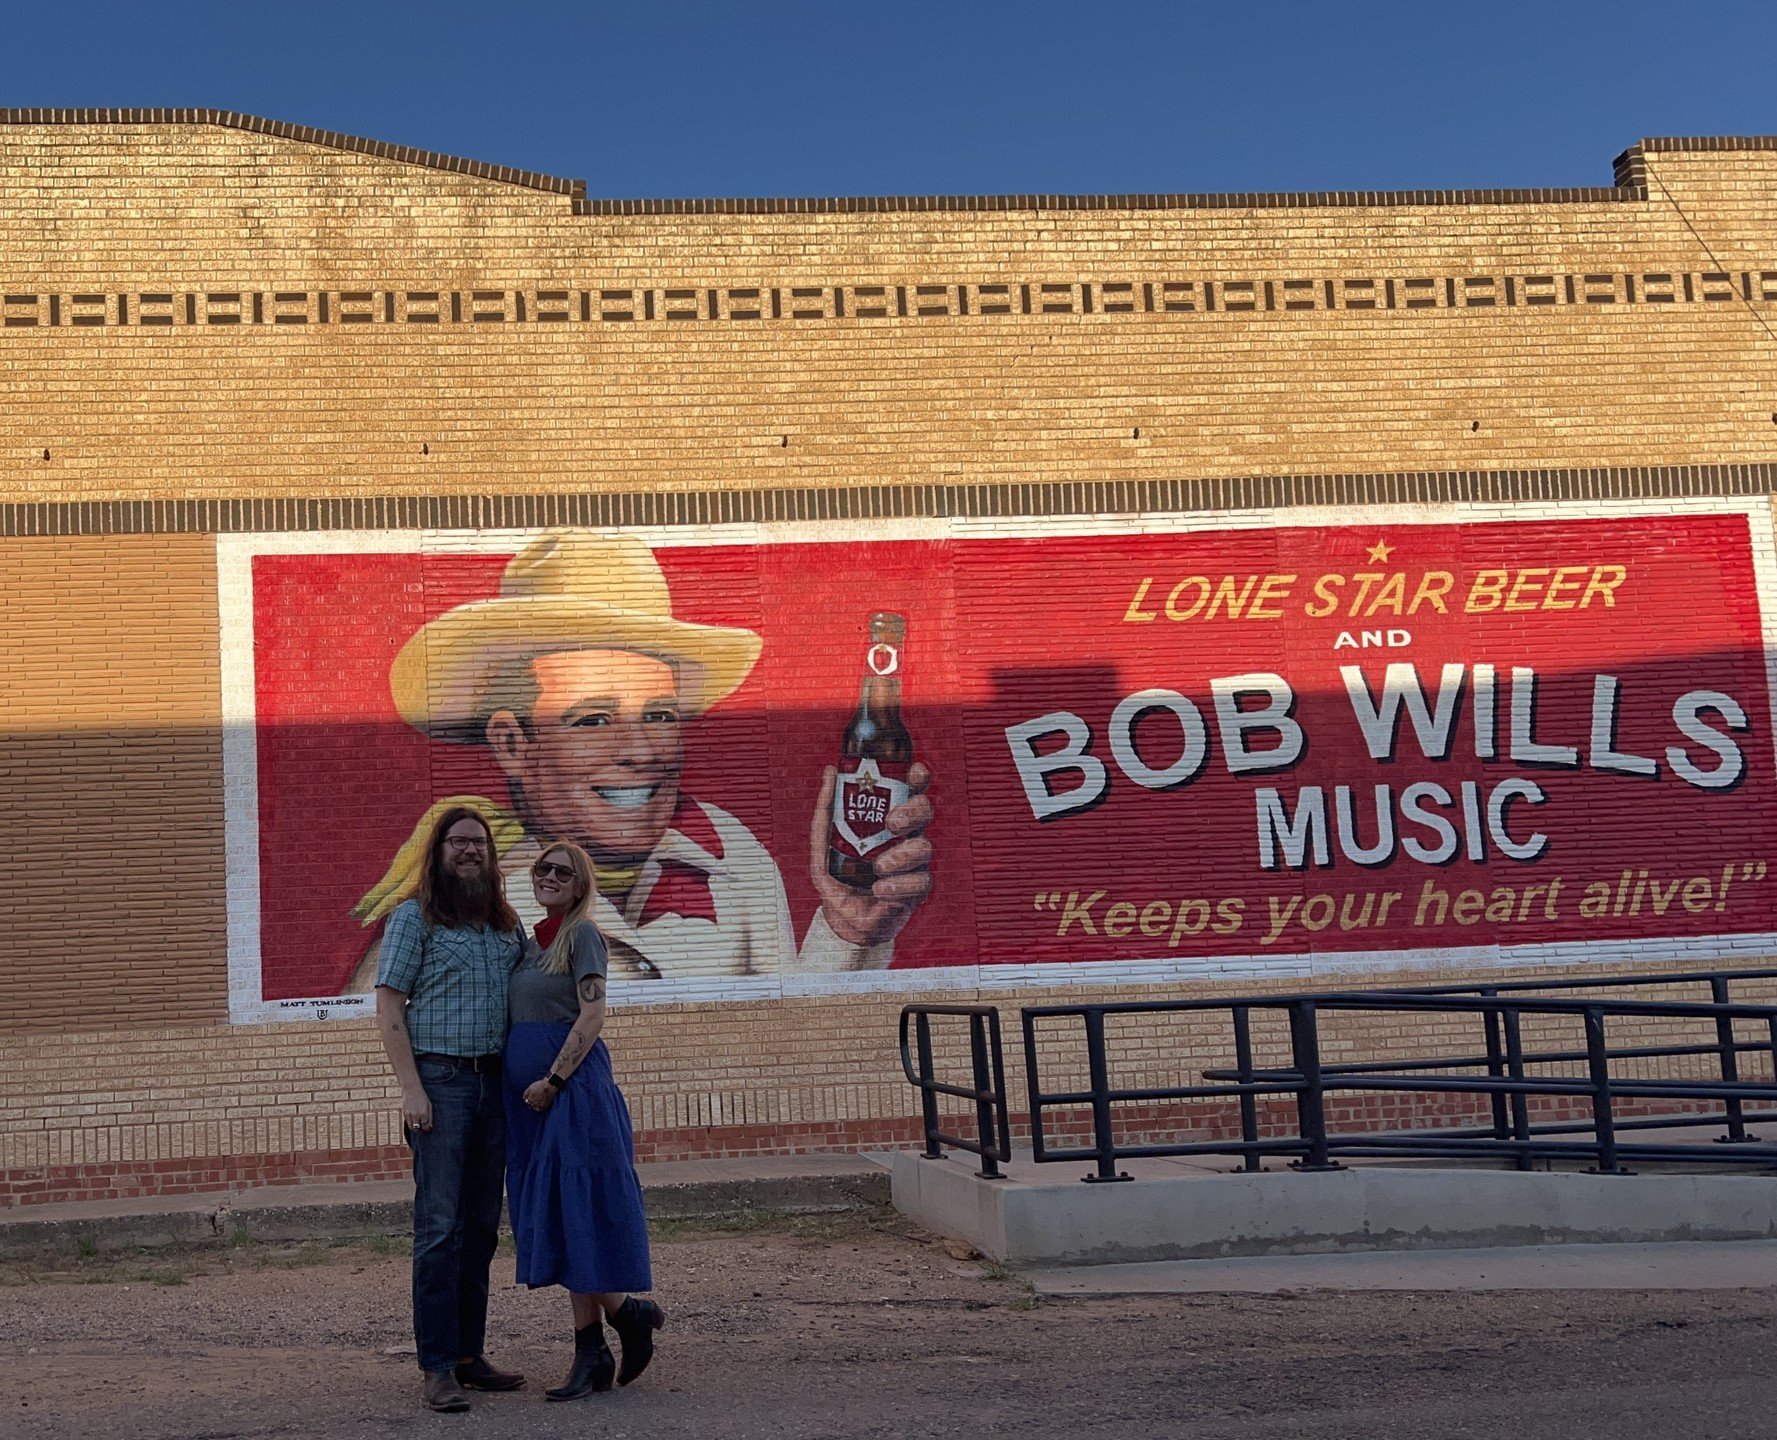 Turkey, Tx &amp; @bobwillsday Bob Wills Foundation, 
Thank you so much for inviting Adam and I to be the MCs for the Bob Wills Day parade! 
It&rsquo;s our 2nd year to do it &amp; we had a blast! 
We didn&rsquo;t have any Lone Star Beer, but we got pl